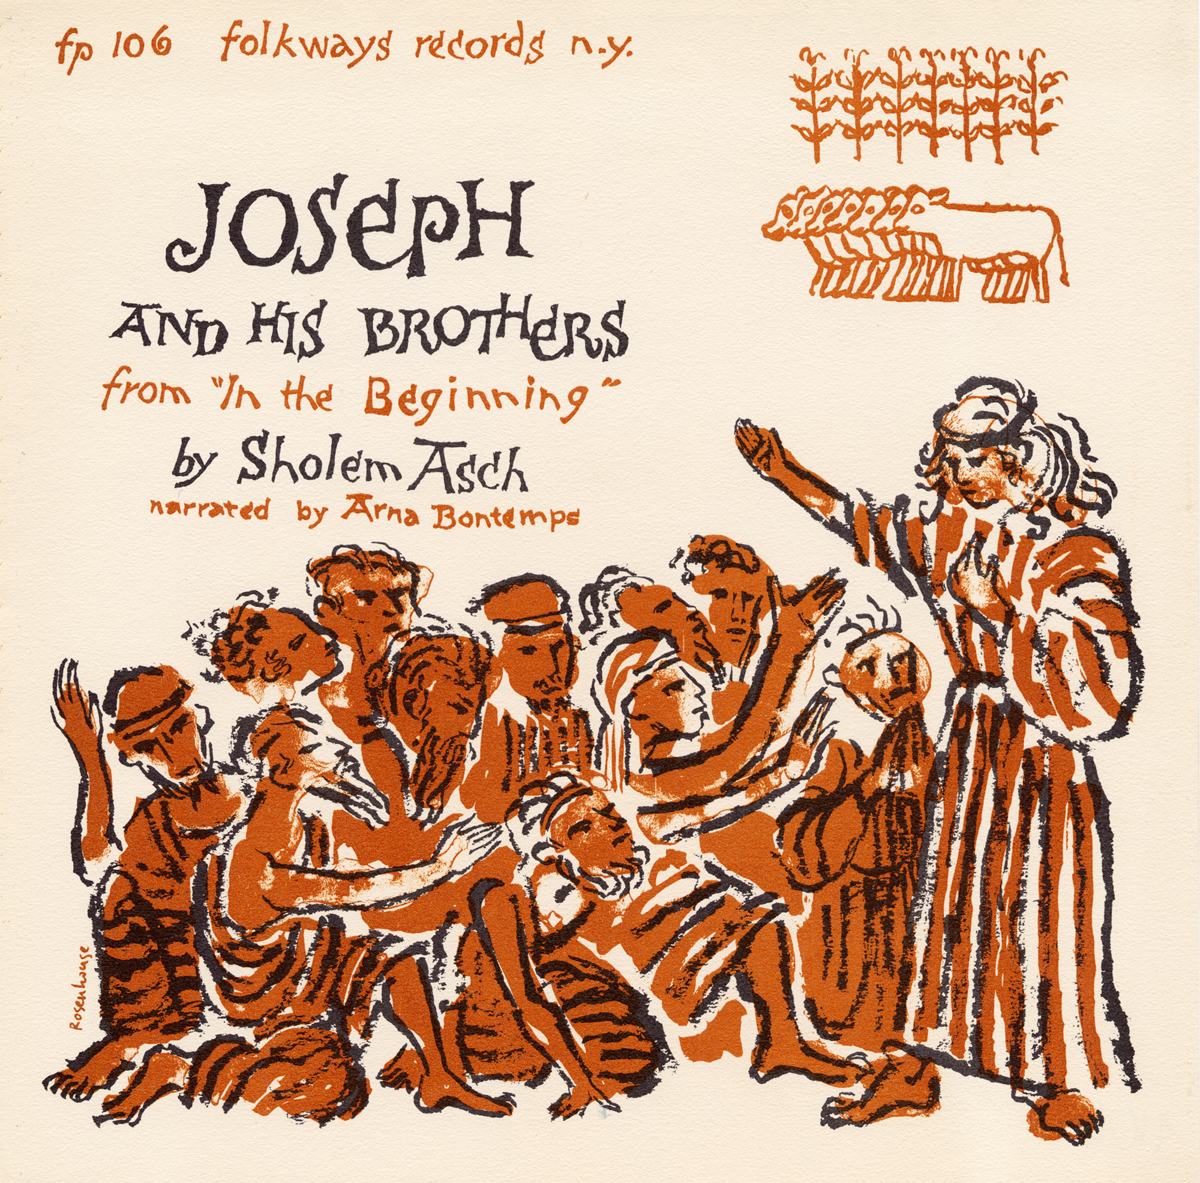 JOSEPH AND HIS BROTHERS: FROM IN THE BEGINNING